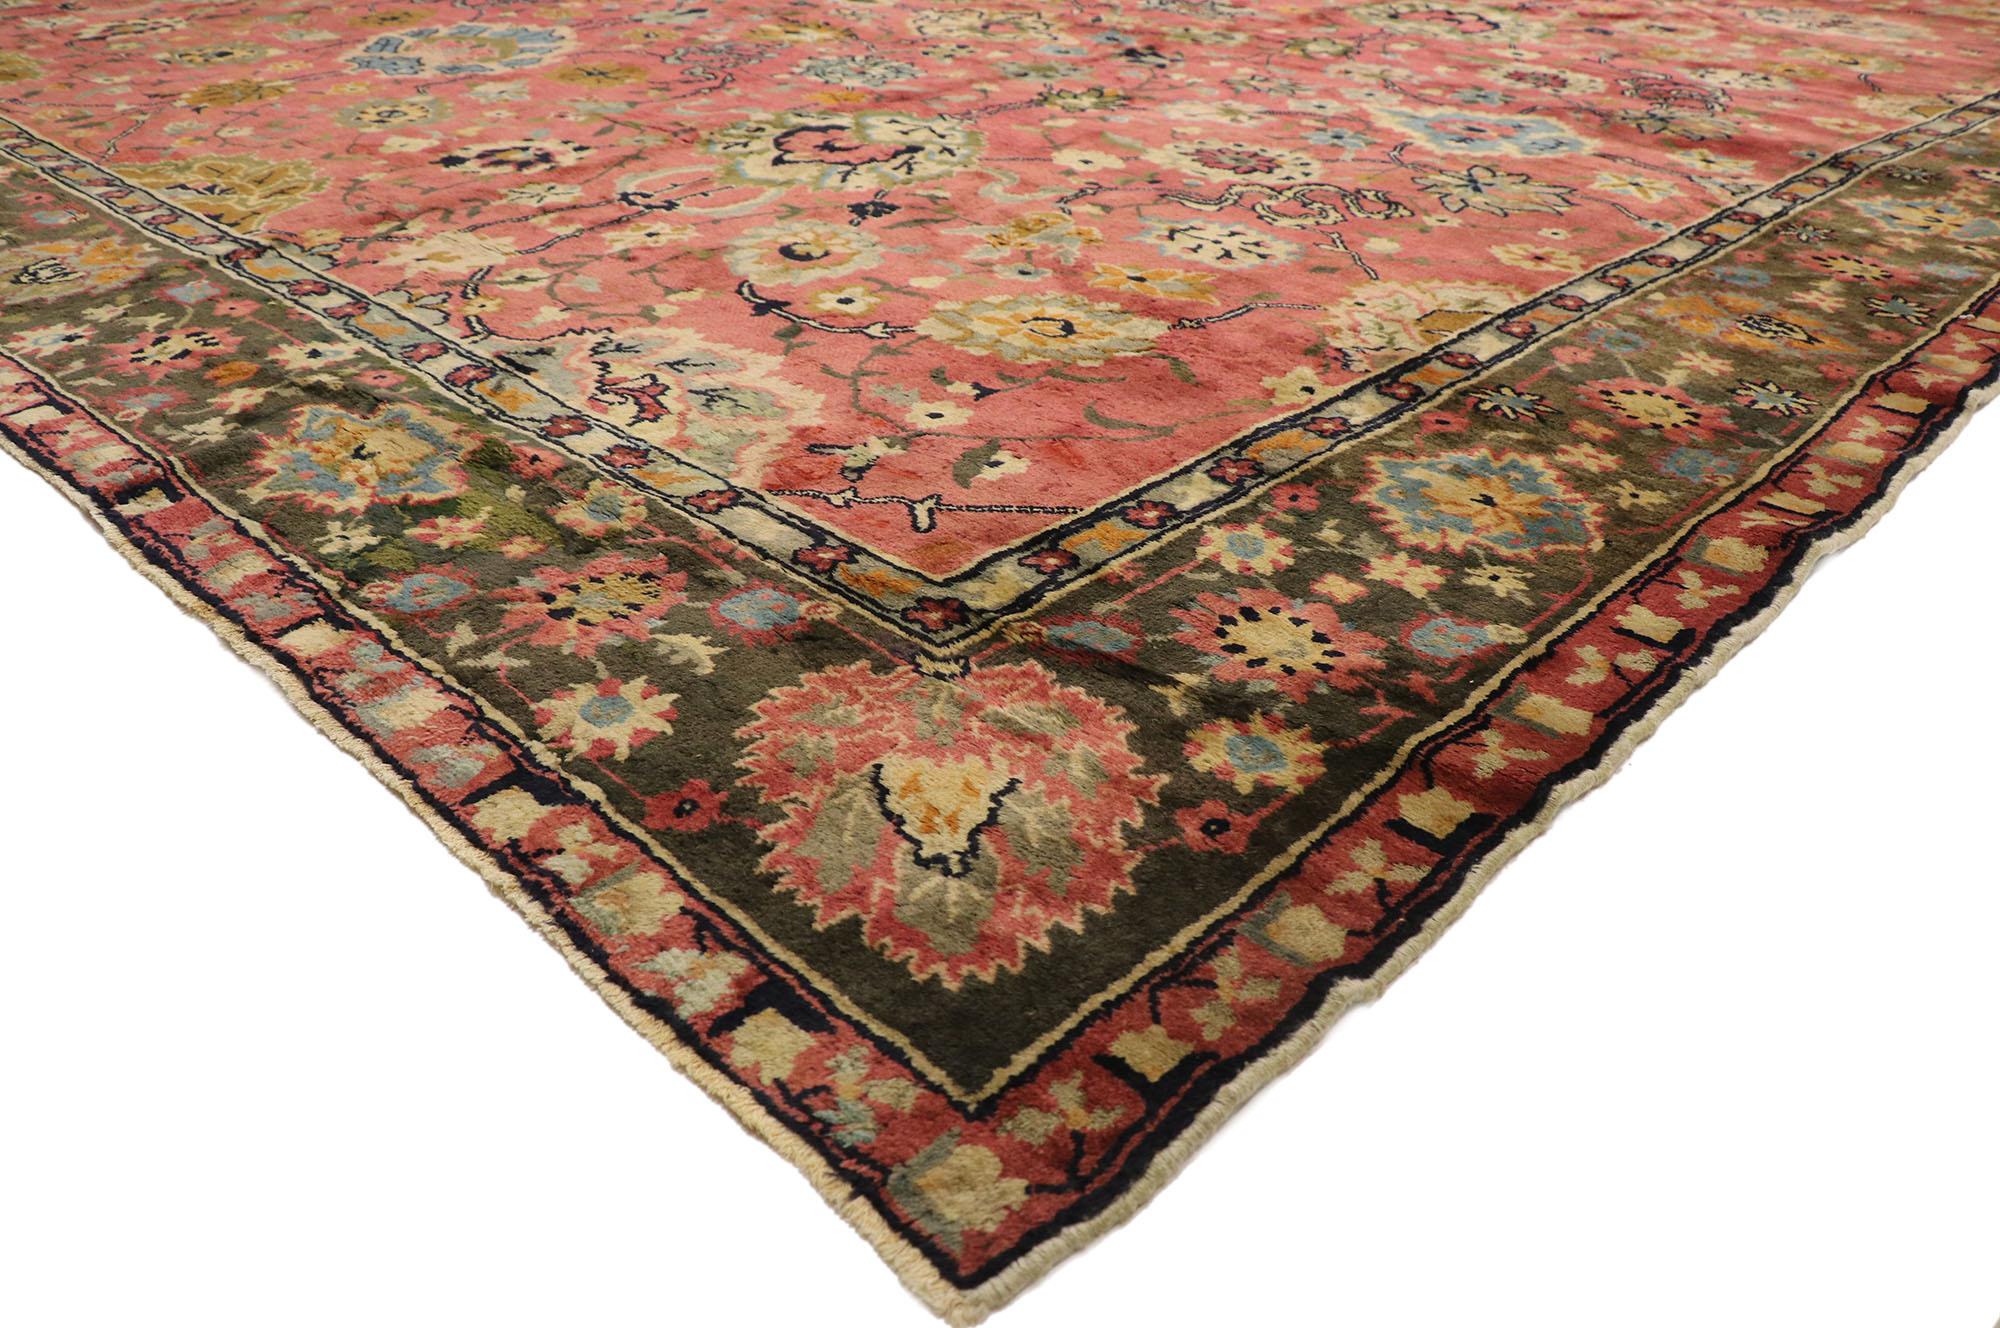 77435 antique Antique Chinese Palace rug with Persian Tabriz style. With timeless appeal, refined colors, and architectural design elements, this hand knotted wool antique Chinese Persian Tabriz style palace rug can beautifully blend contemporary